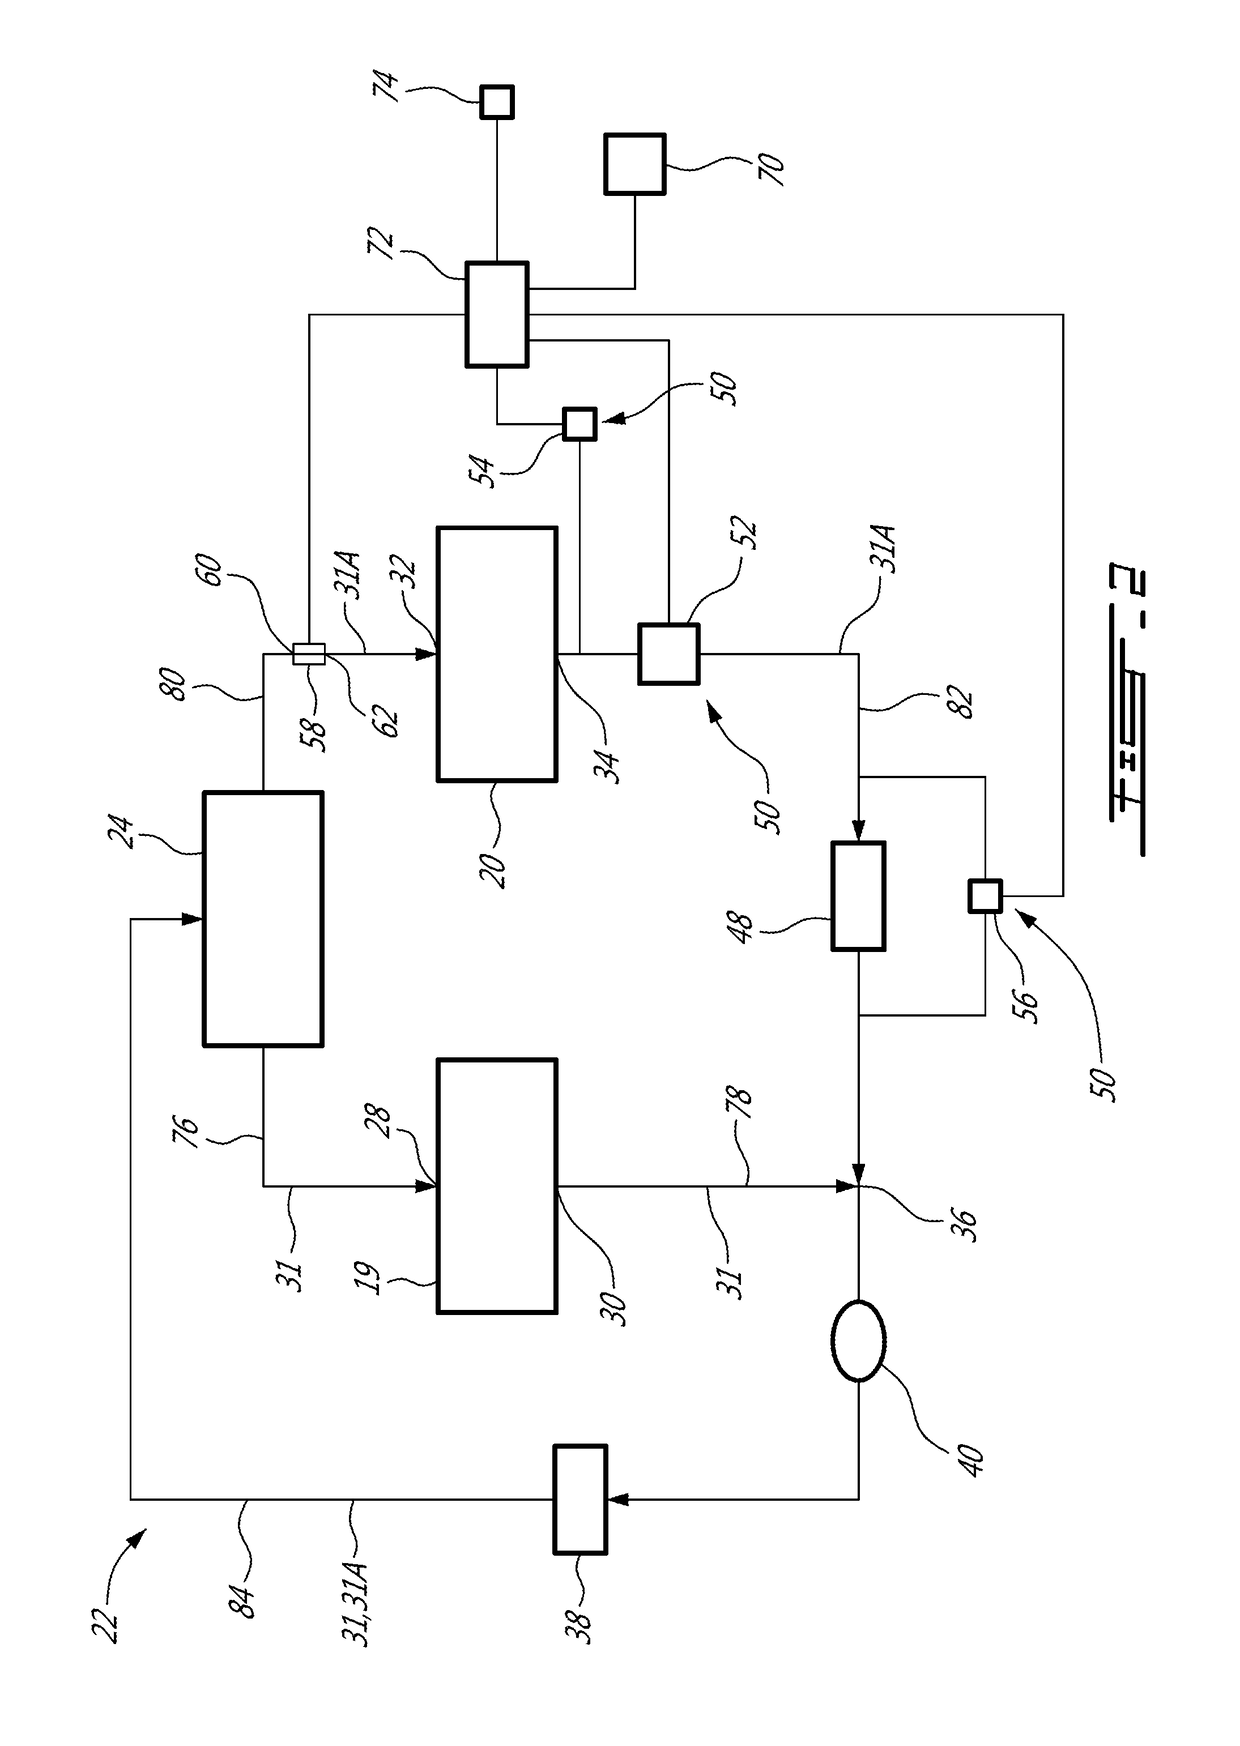 Shared oil system arrangement for an engine component and a generator